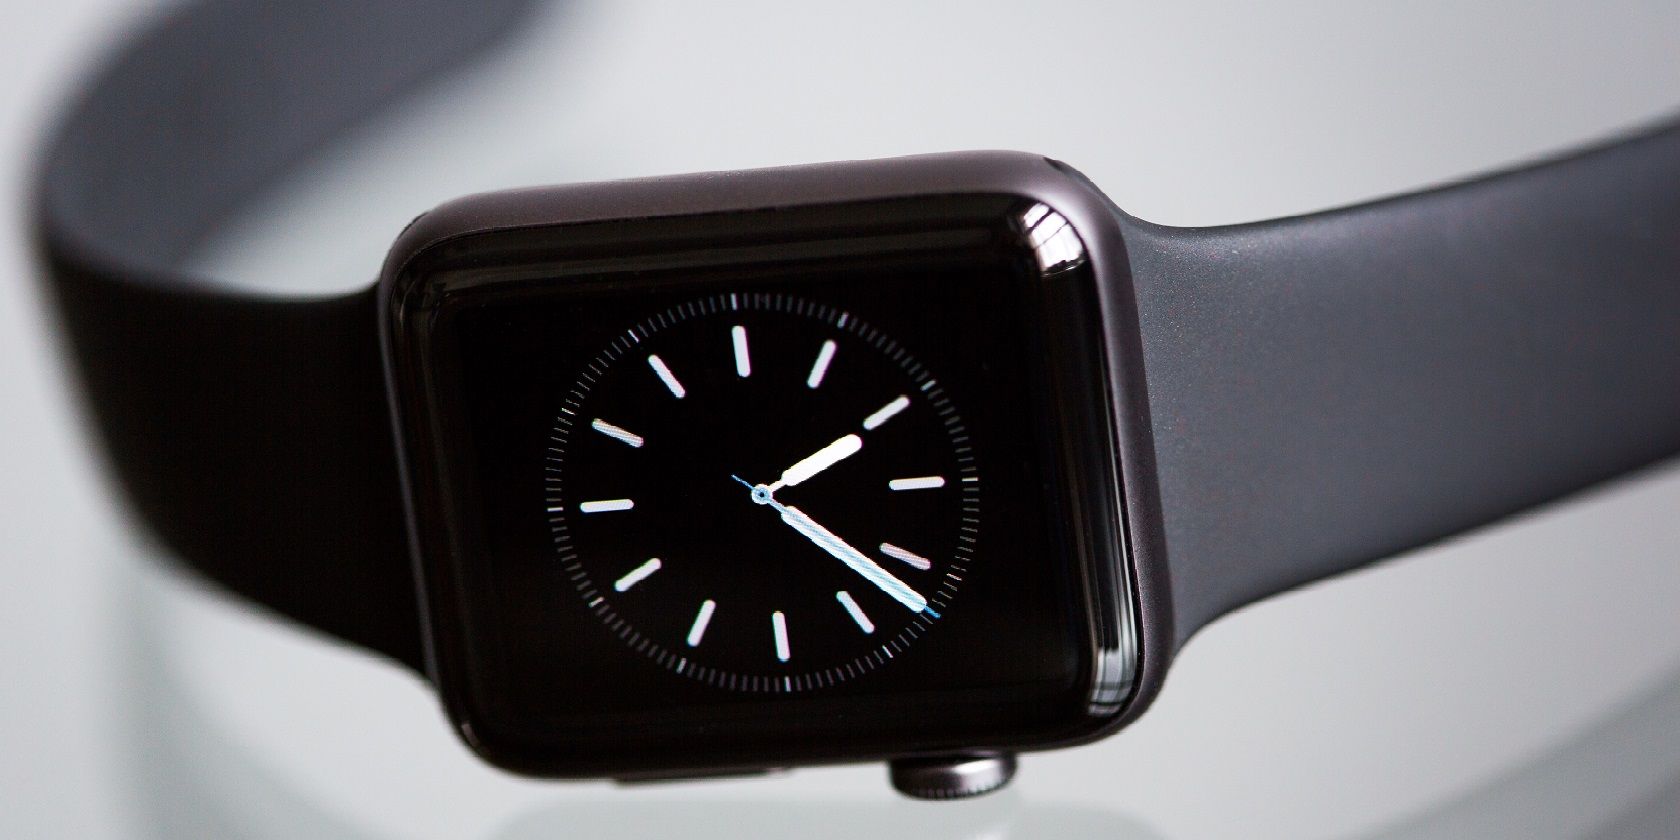 Why The Apple Watch Wasn't Named iWatch 